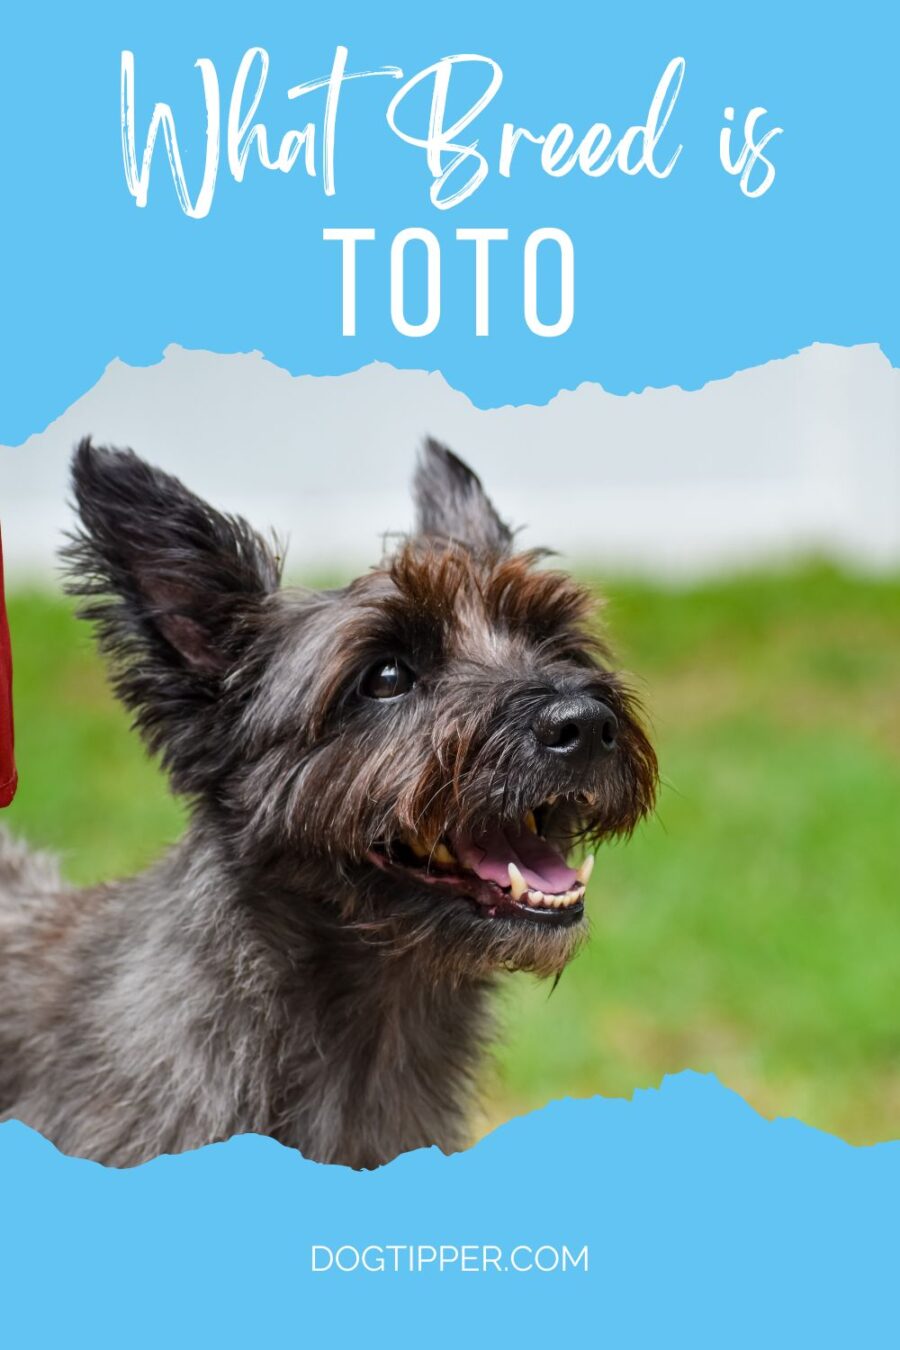 image of Cairn Terrier who looks much like Toto from The Wizard of Oz movie